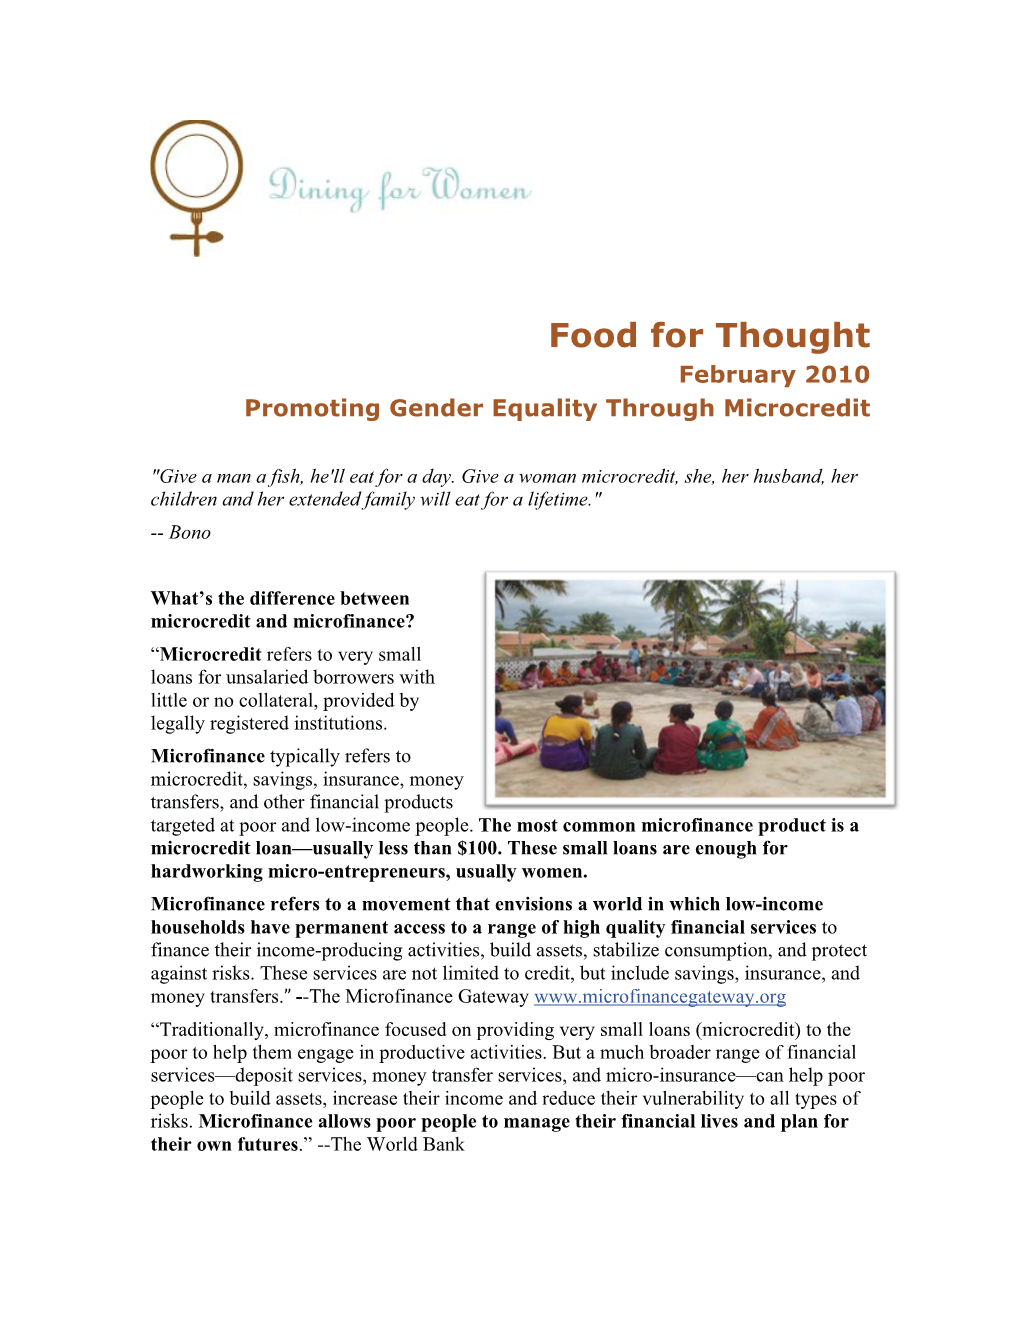 Food for Thought February 2010 Promoting Gender Equality Through Microcredit